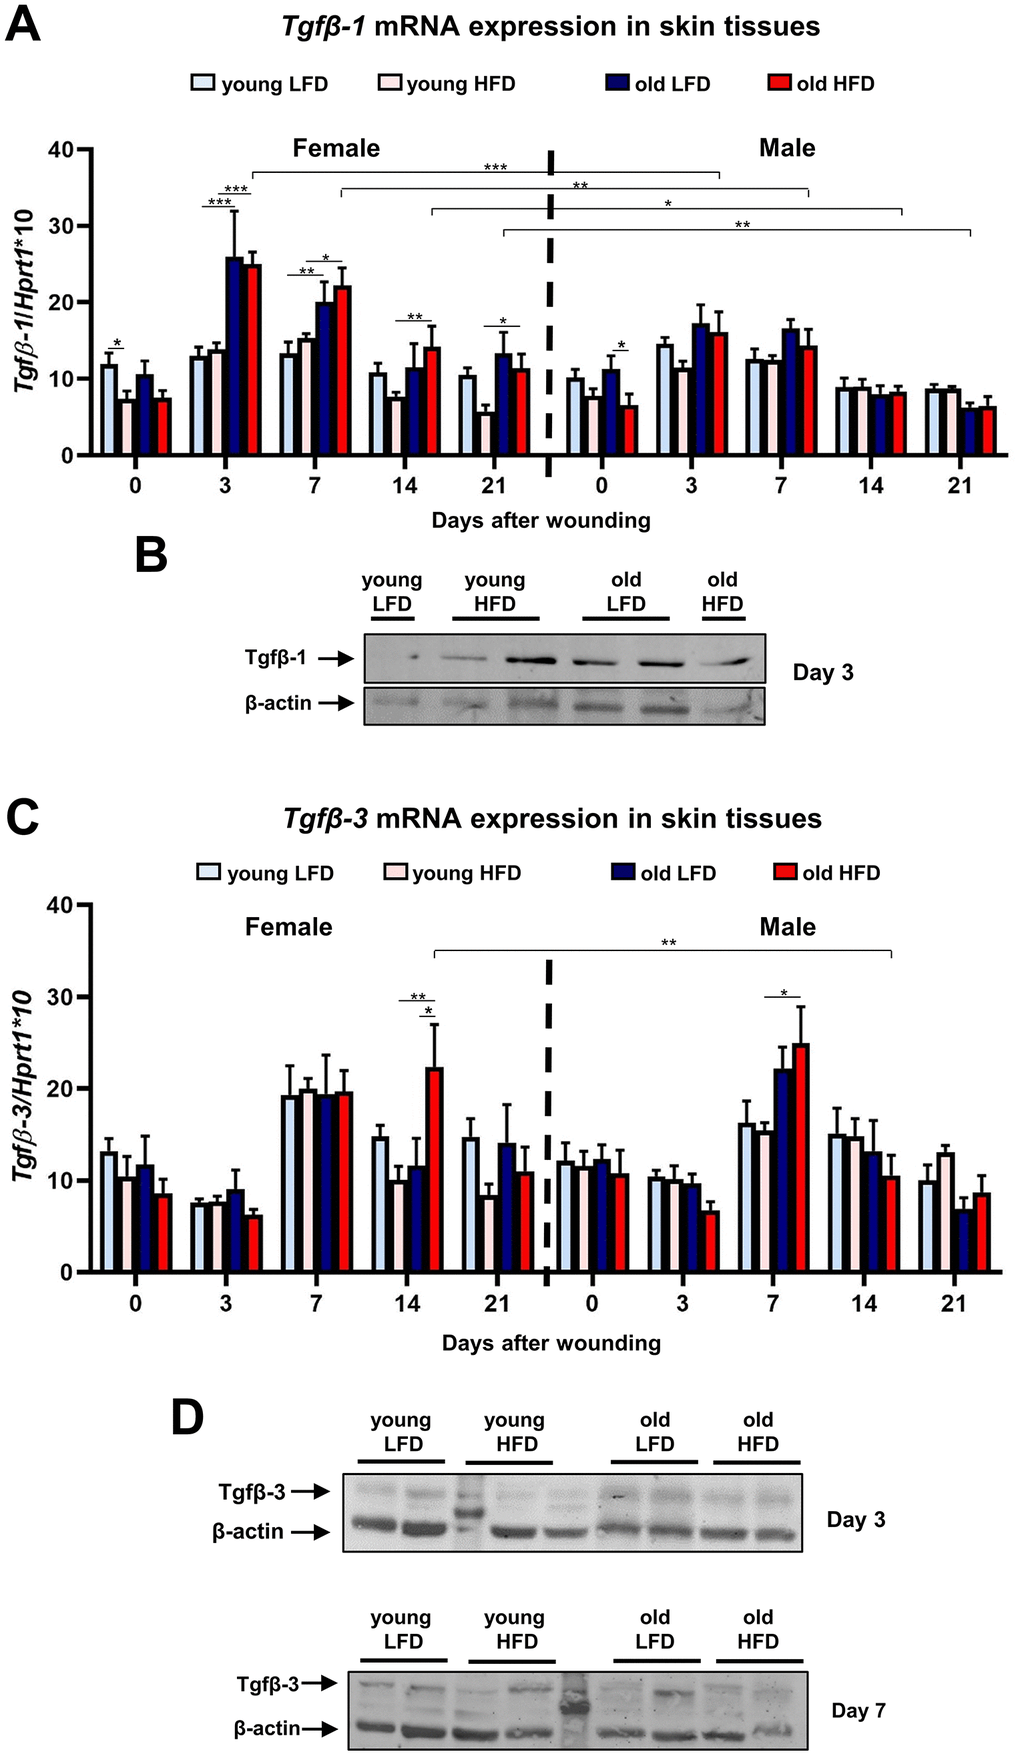 Tgfβ-1 and Tgfβ-3 expression during skin wound healing. qRT-PCR mRNA expression of Tgfβ-1 (A) and Tgfβ-3 (C) in uninjured and post-injured skin tissues collected from female, male, young, old, fed LFD or HFD mice (n=4-8 skin samples per group). Representative Western blot analysis of Tgfβ-1 (B) and Tgfβ-3 (D) protein expression at post-wounded day 3 (B, D) and day 7 (D). The bars indicate lsmean ±SE *p